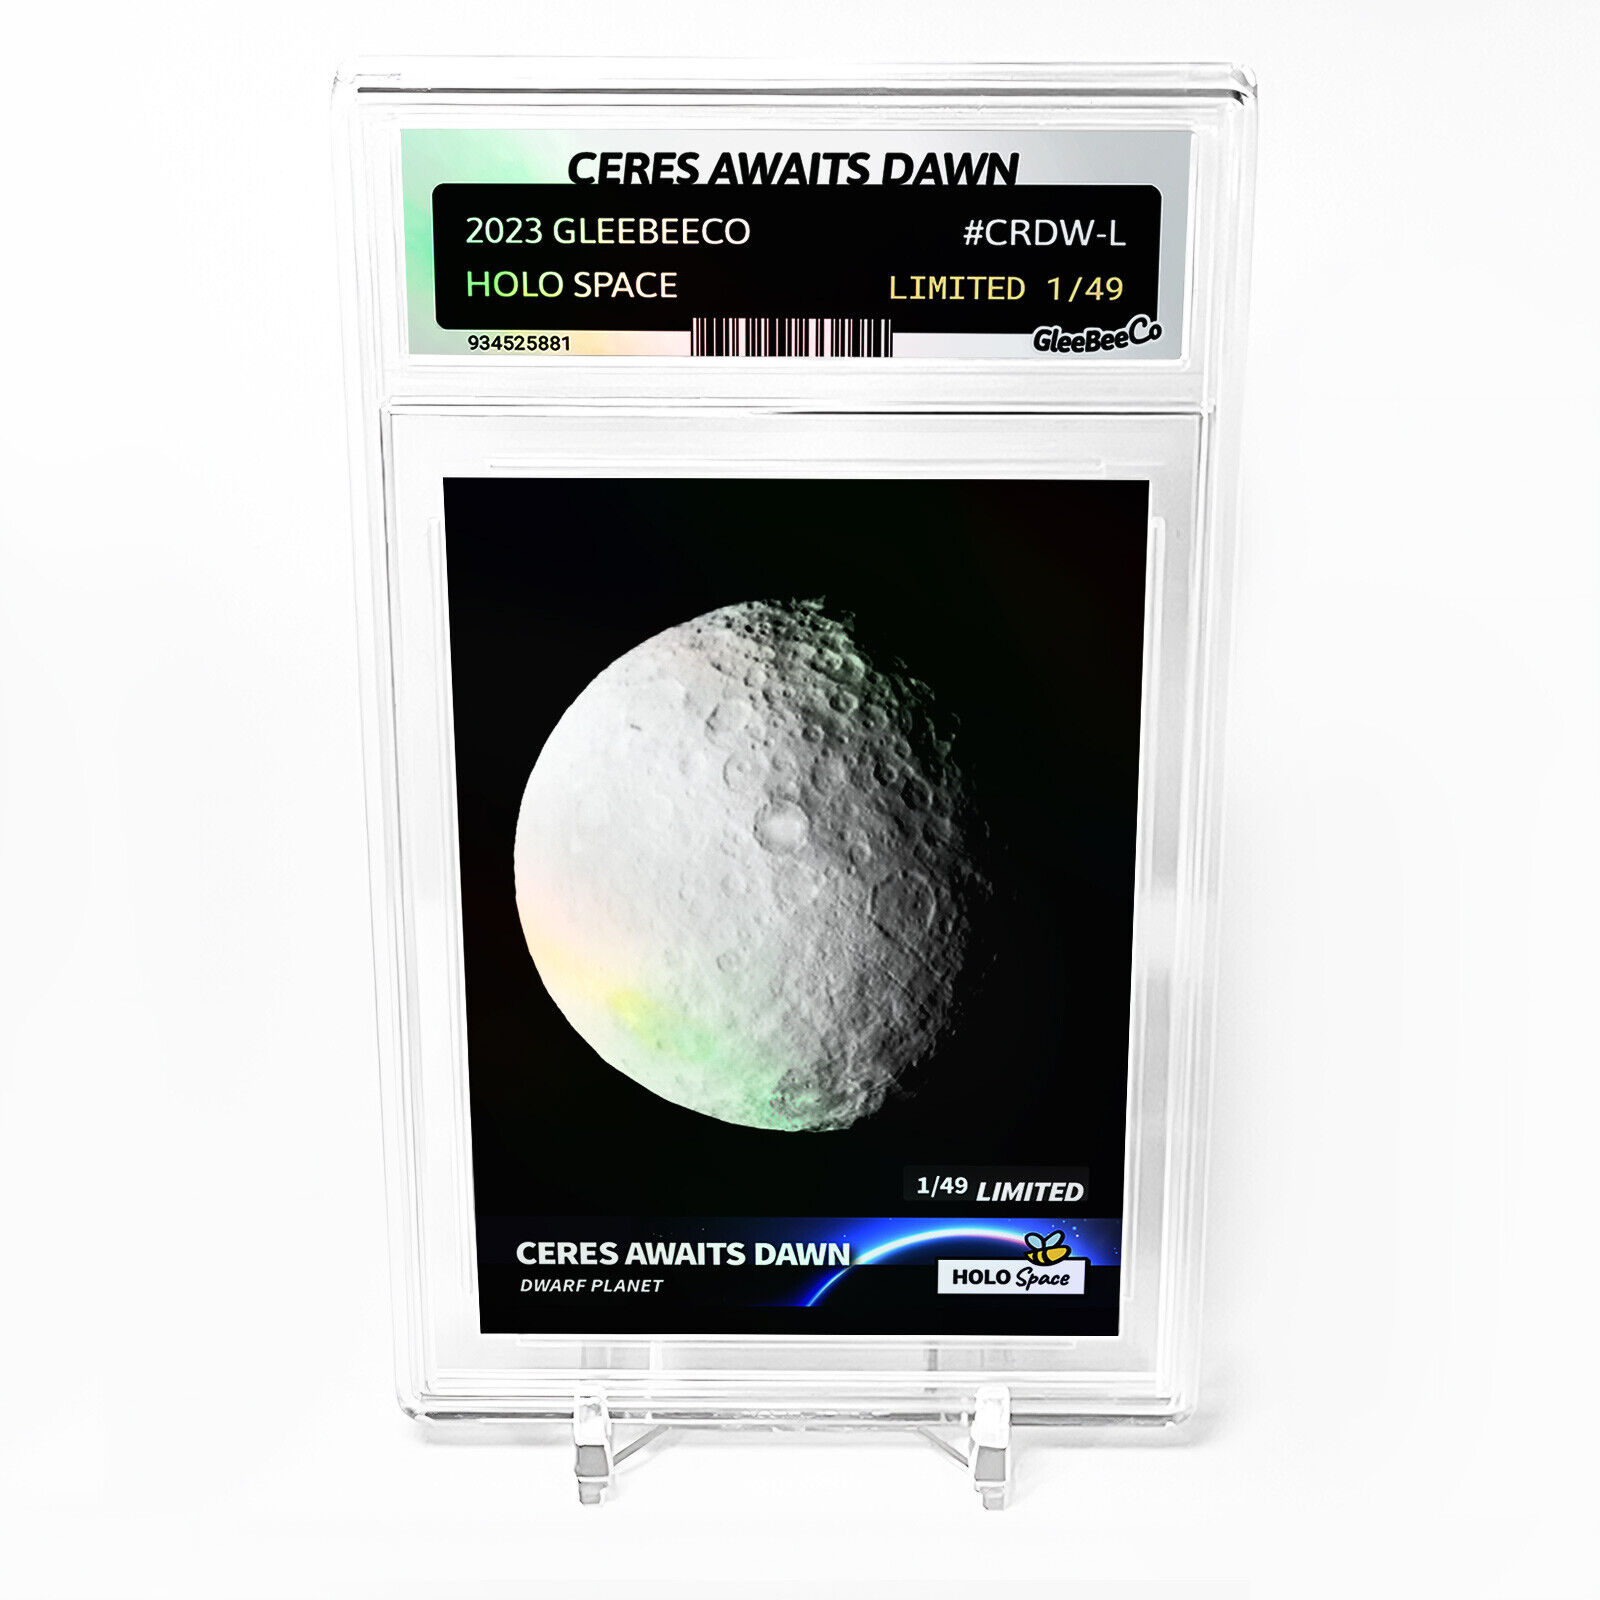 CERES AWAITS DAWN Dwarf Planet Card GleeBeeCo Holo Space (Slab) #CRDW-L Only /49